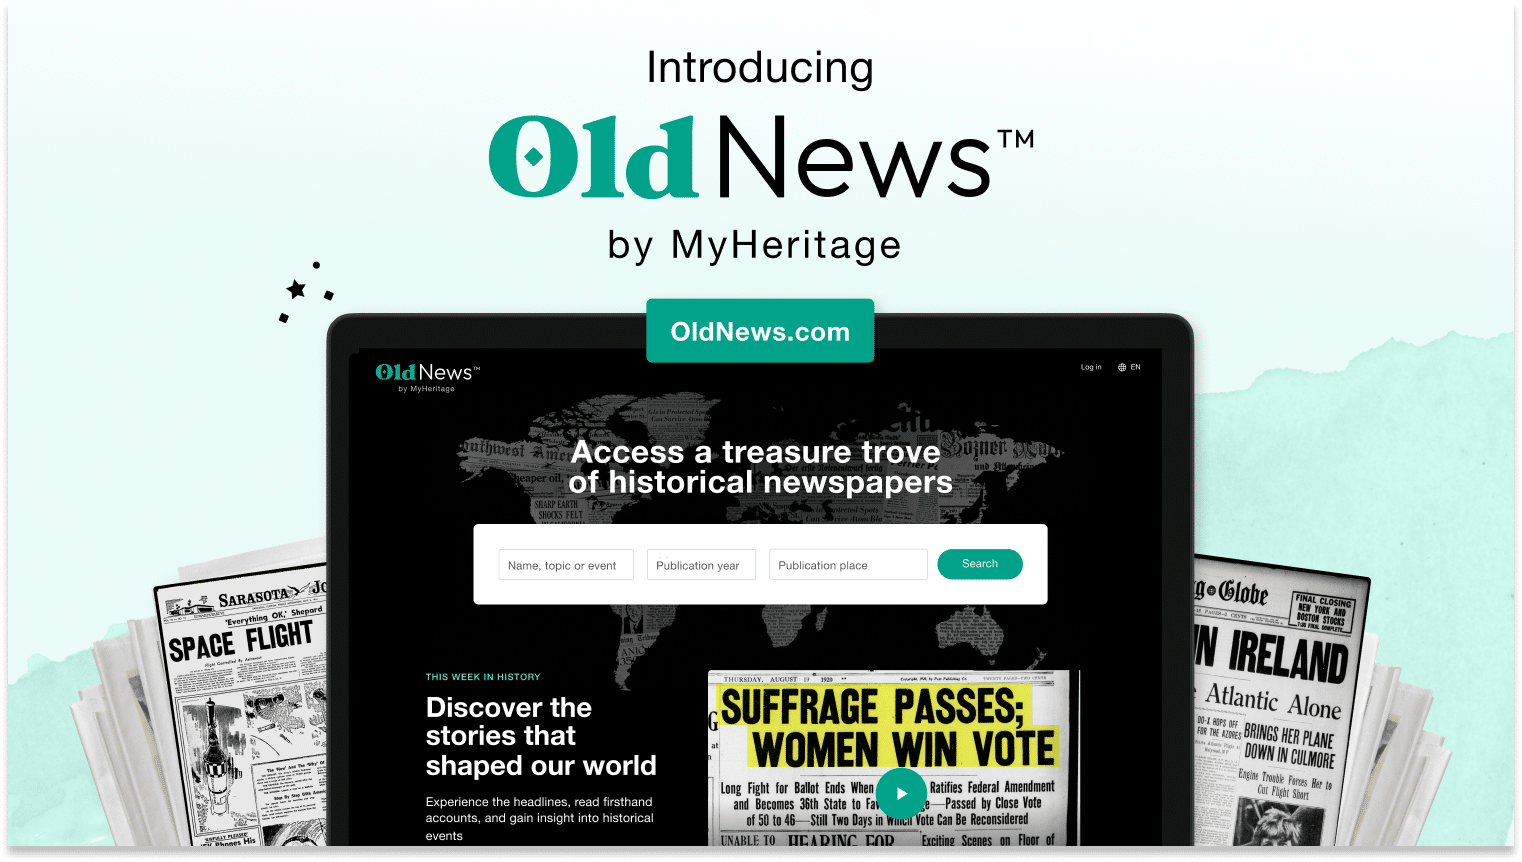 Introducing OldNews.com, A New Website for Exploring Historical Newspapers